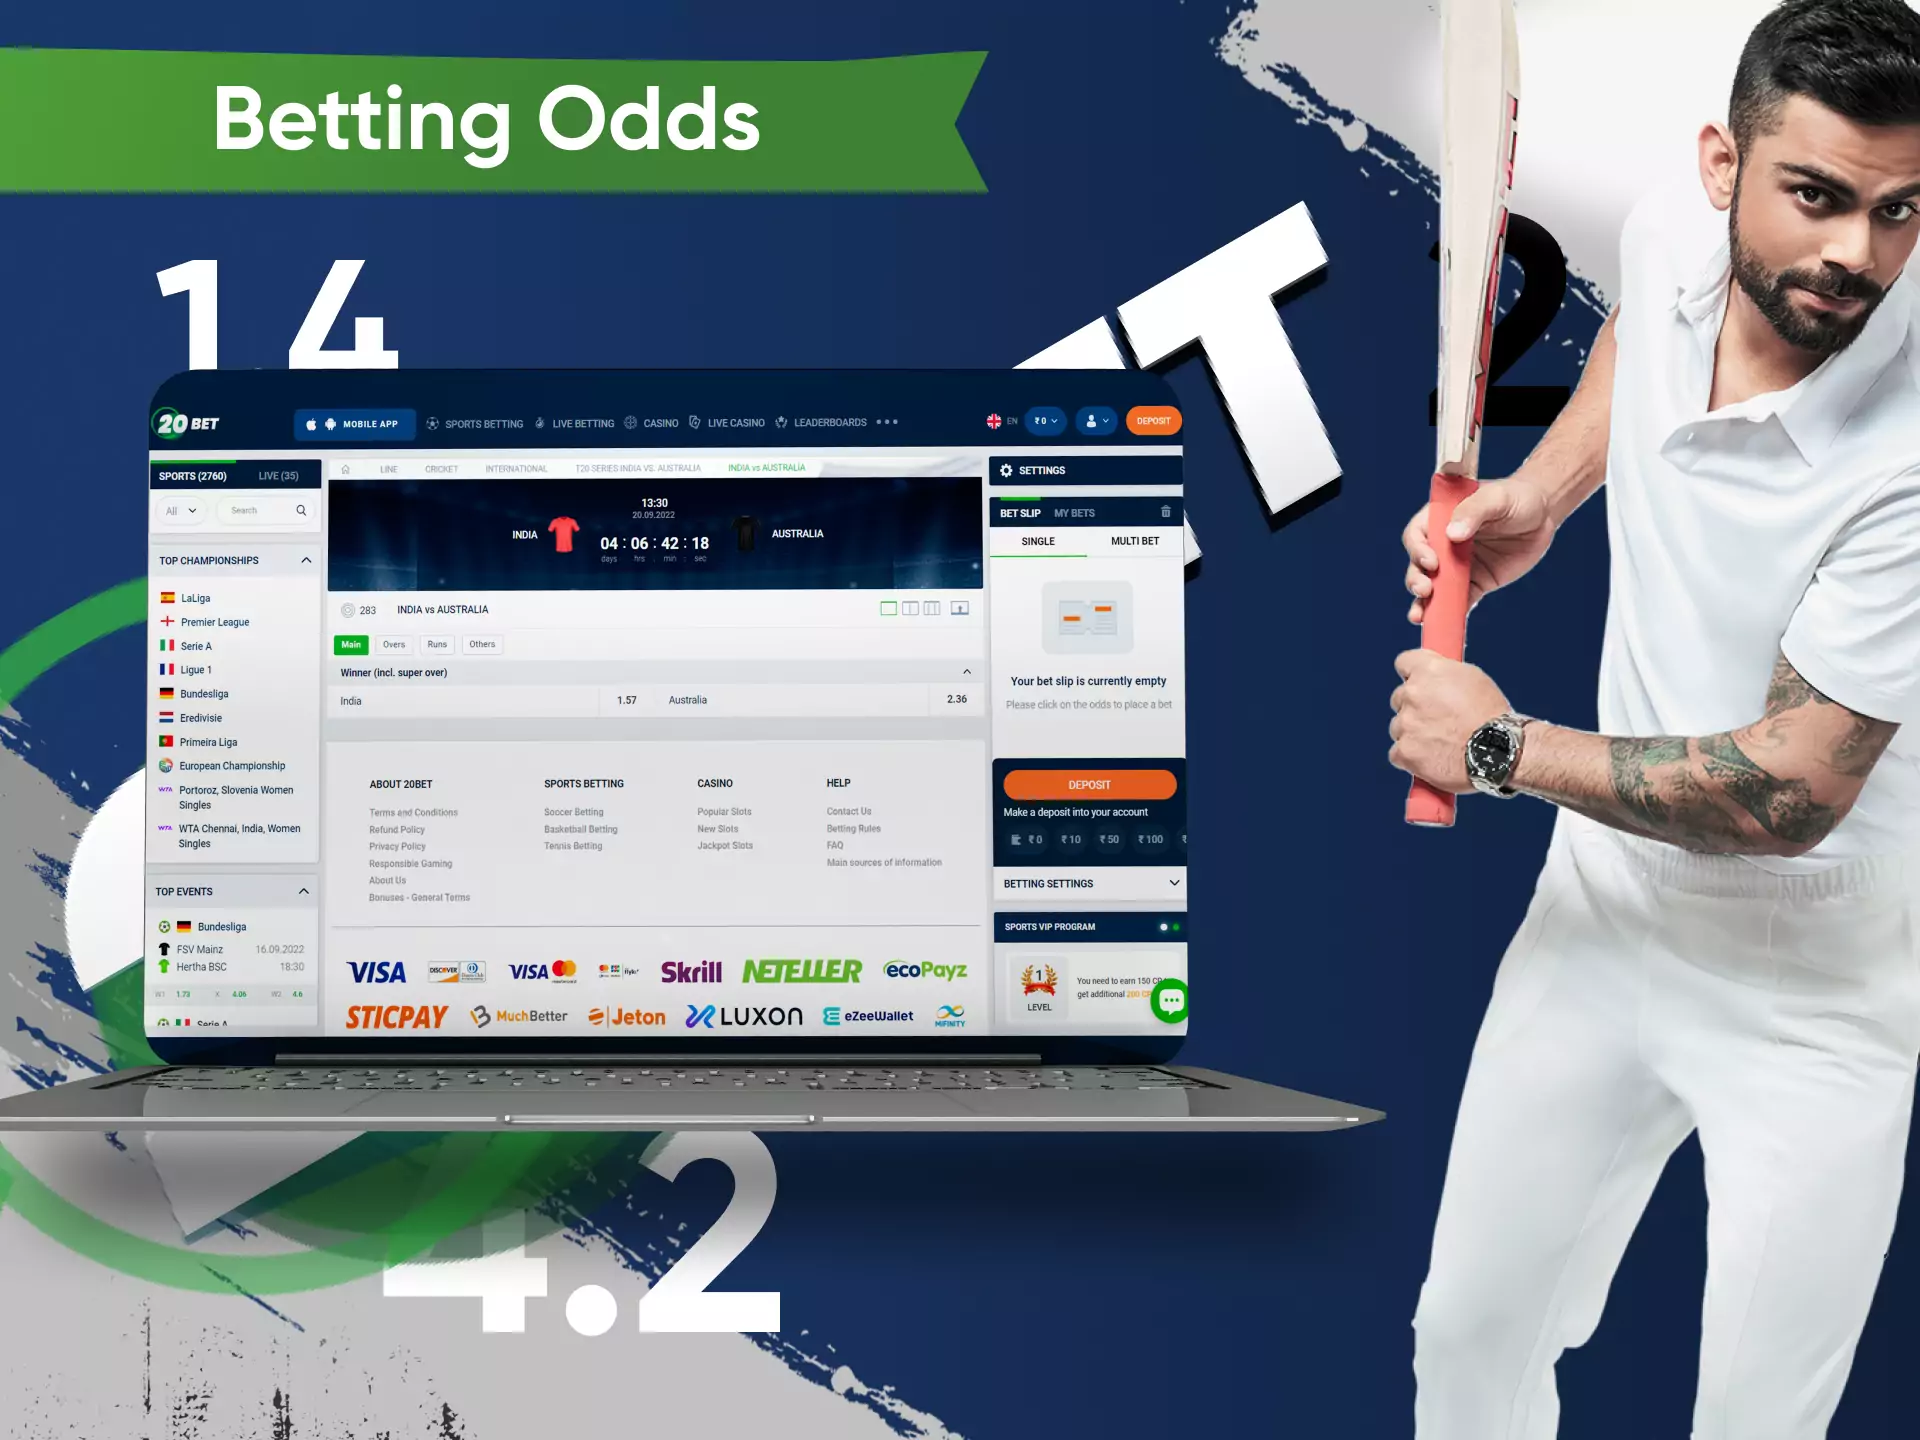 20bet provide great odds for each event.